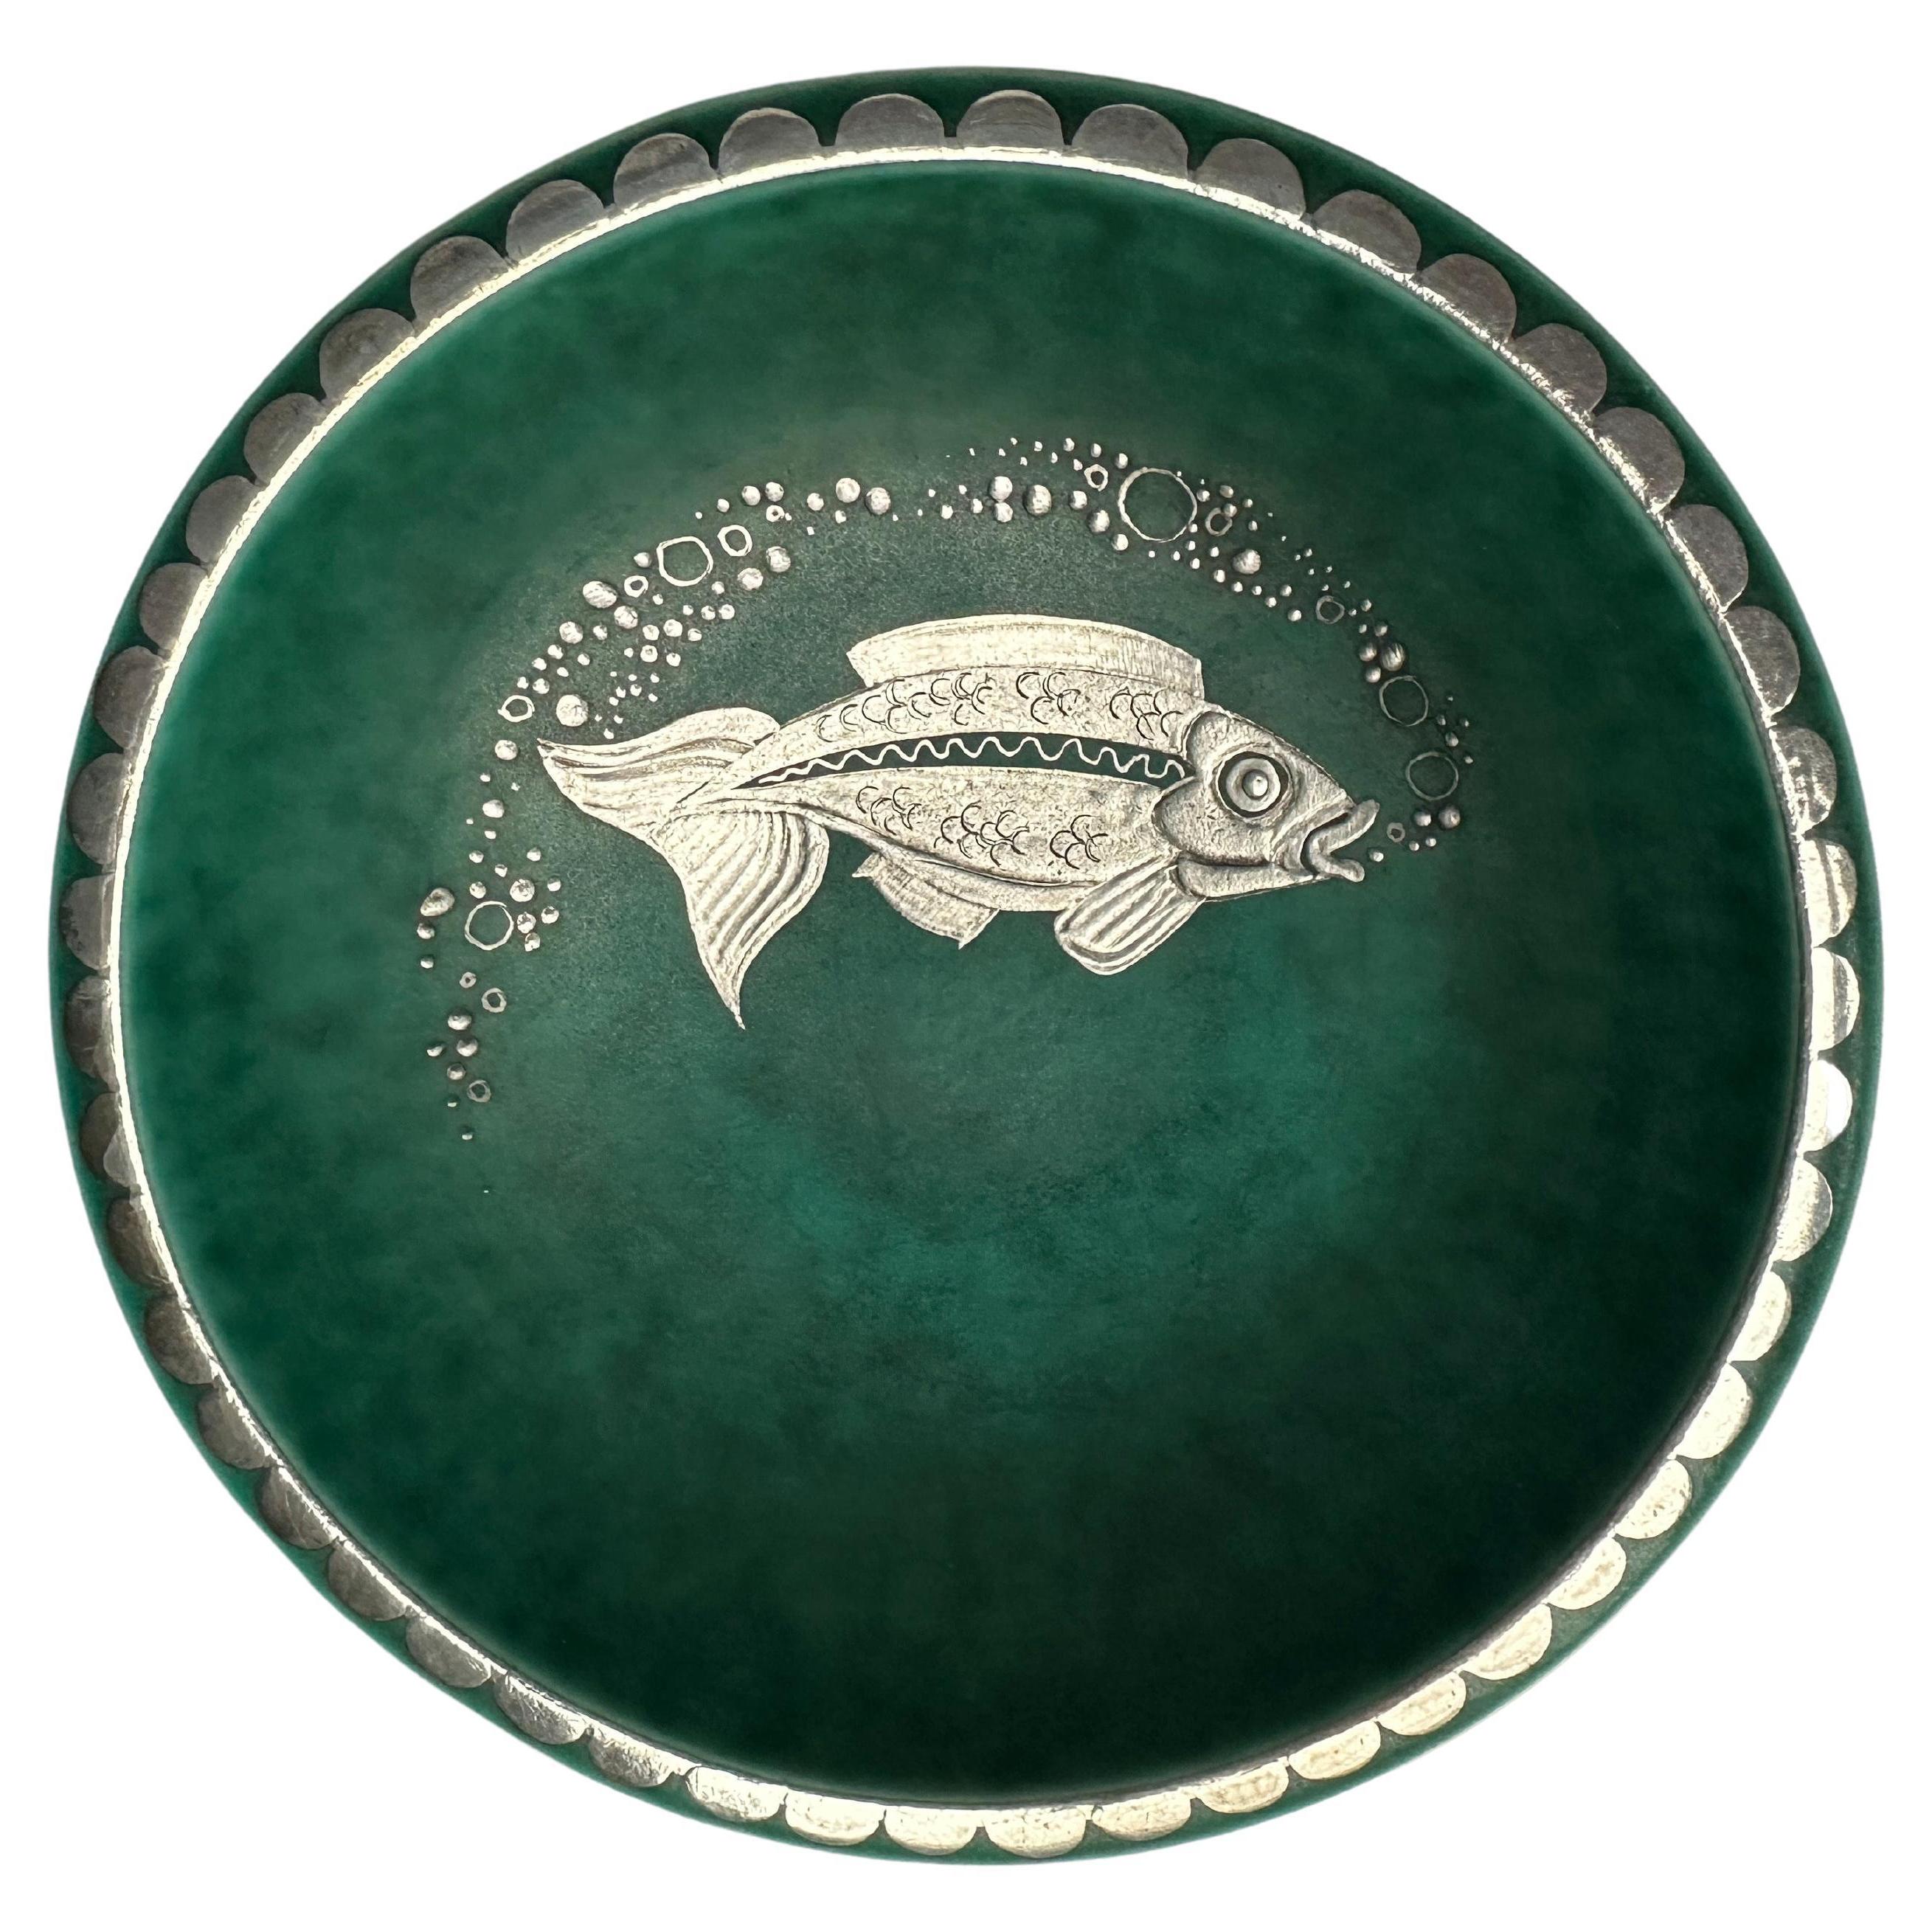 Wilhelm Kage Bowl in Ceramic with Silver Fish Inlay for Gustavsberg Argenta